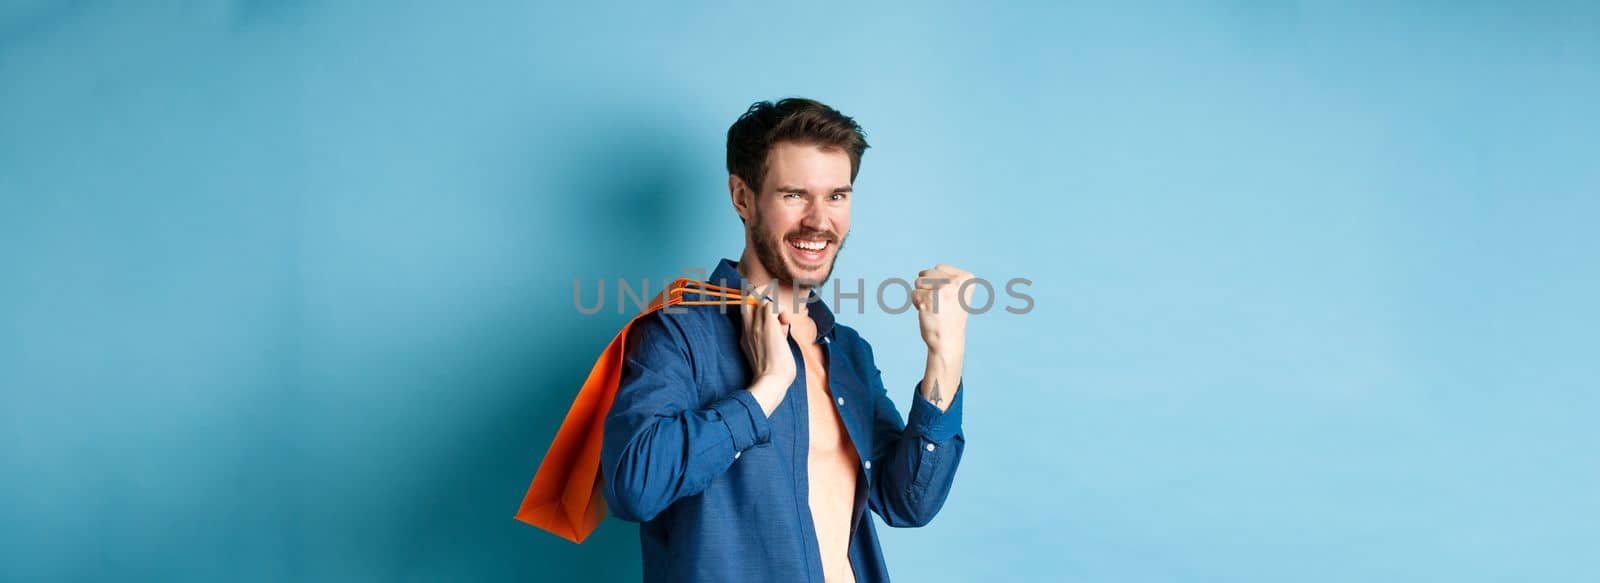 Cheerful guy saying yes, raising fist pump and smiling, holding orange shopping bag, feeling joy after buying with discounts, standing on blue background.